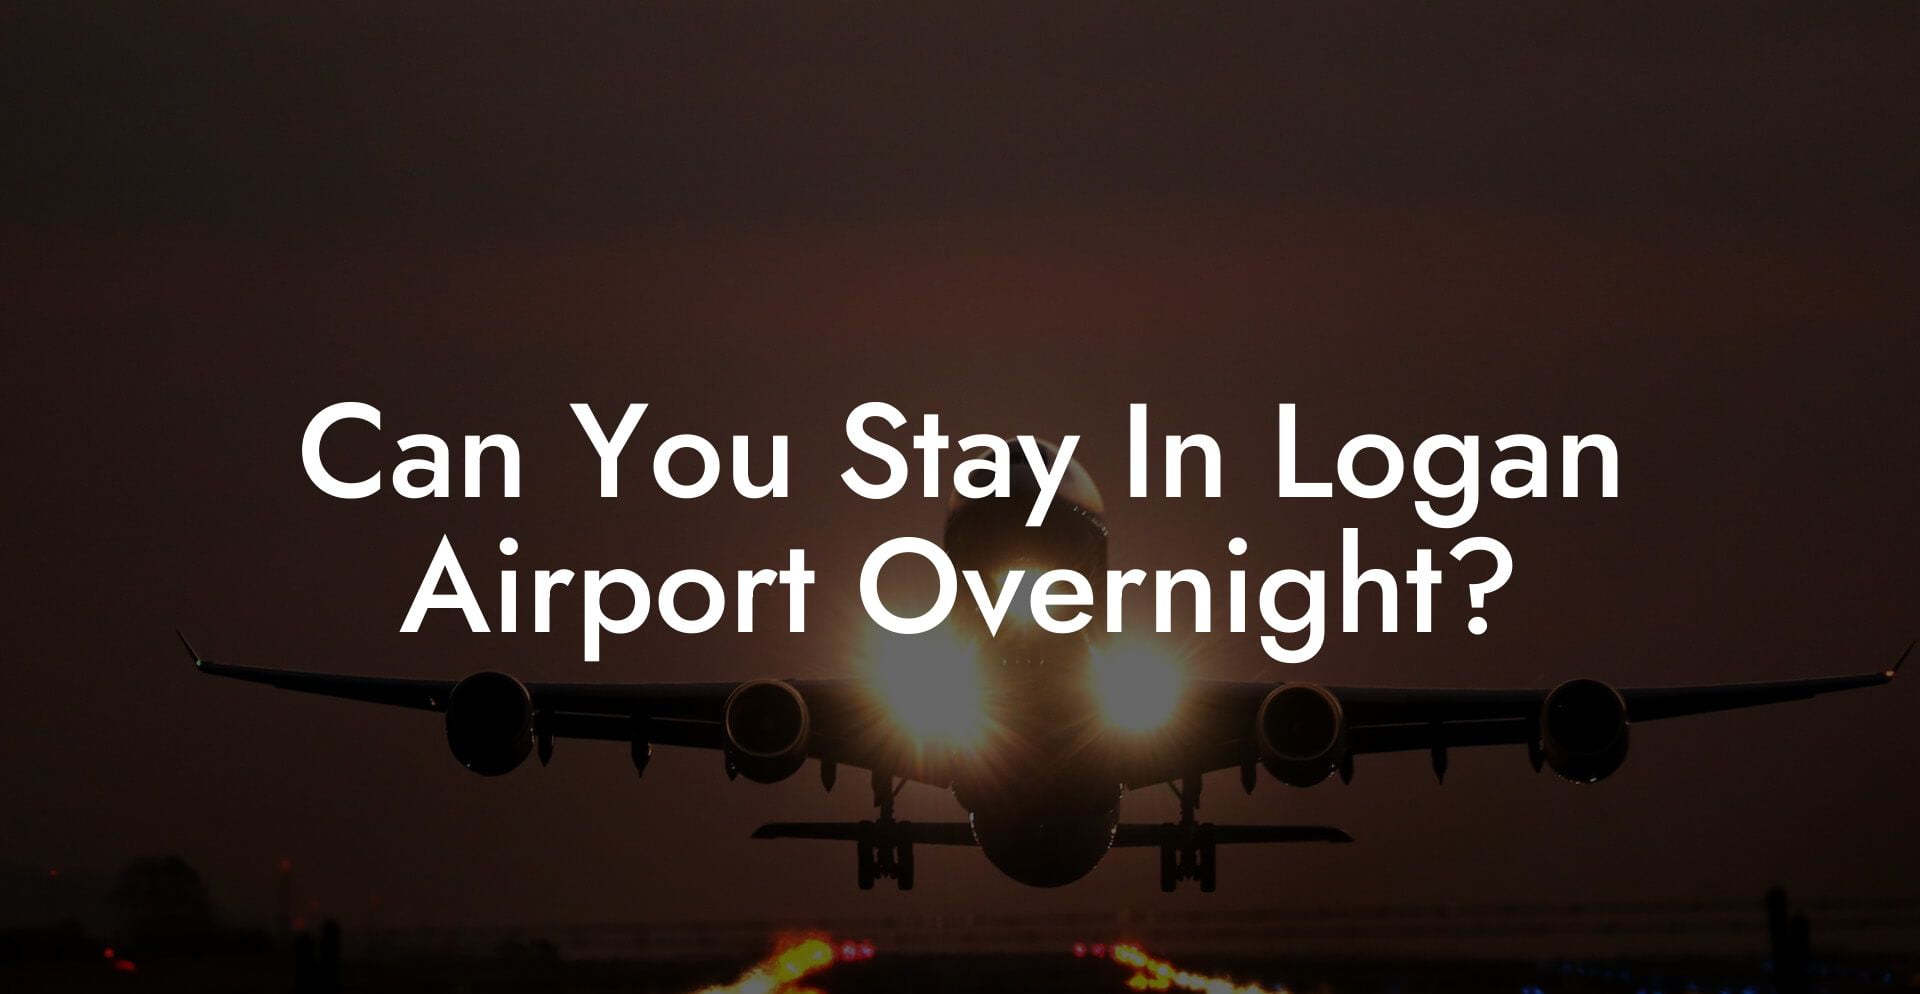 Can You Stay In Logan Airport Overnight?